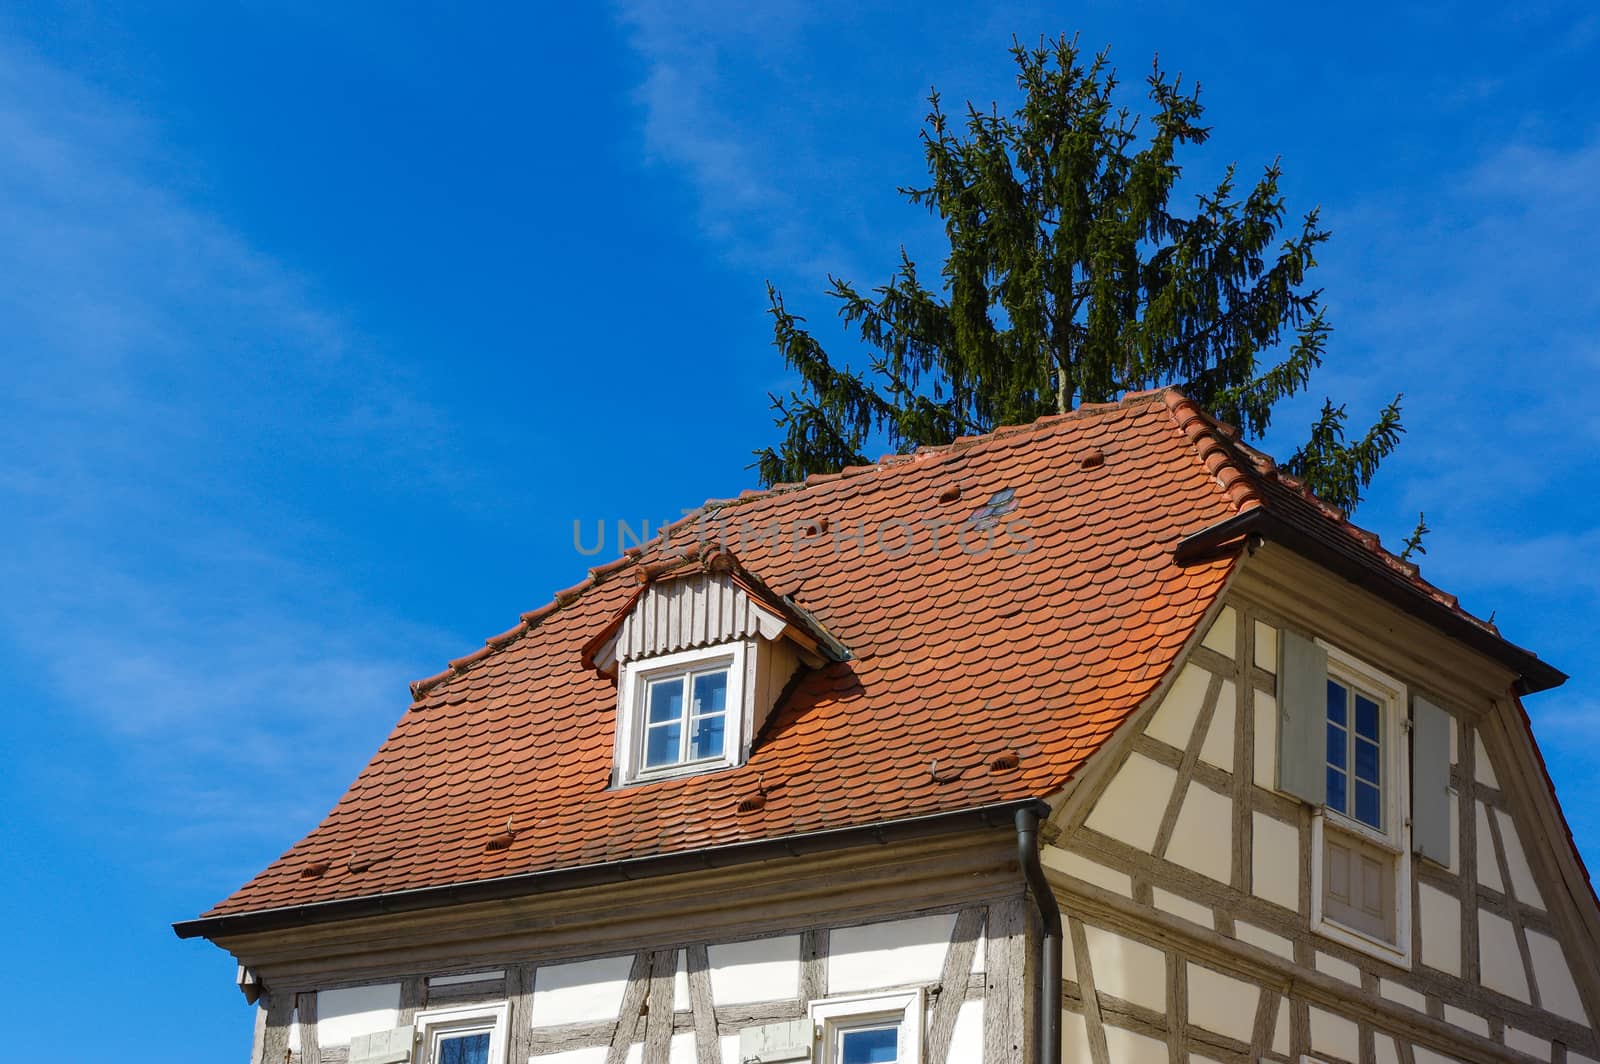 roof of a residential tudor style house with blue sky in background by evolutionnow